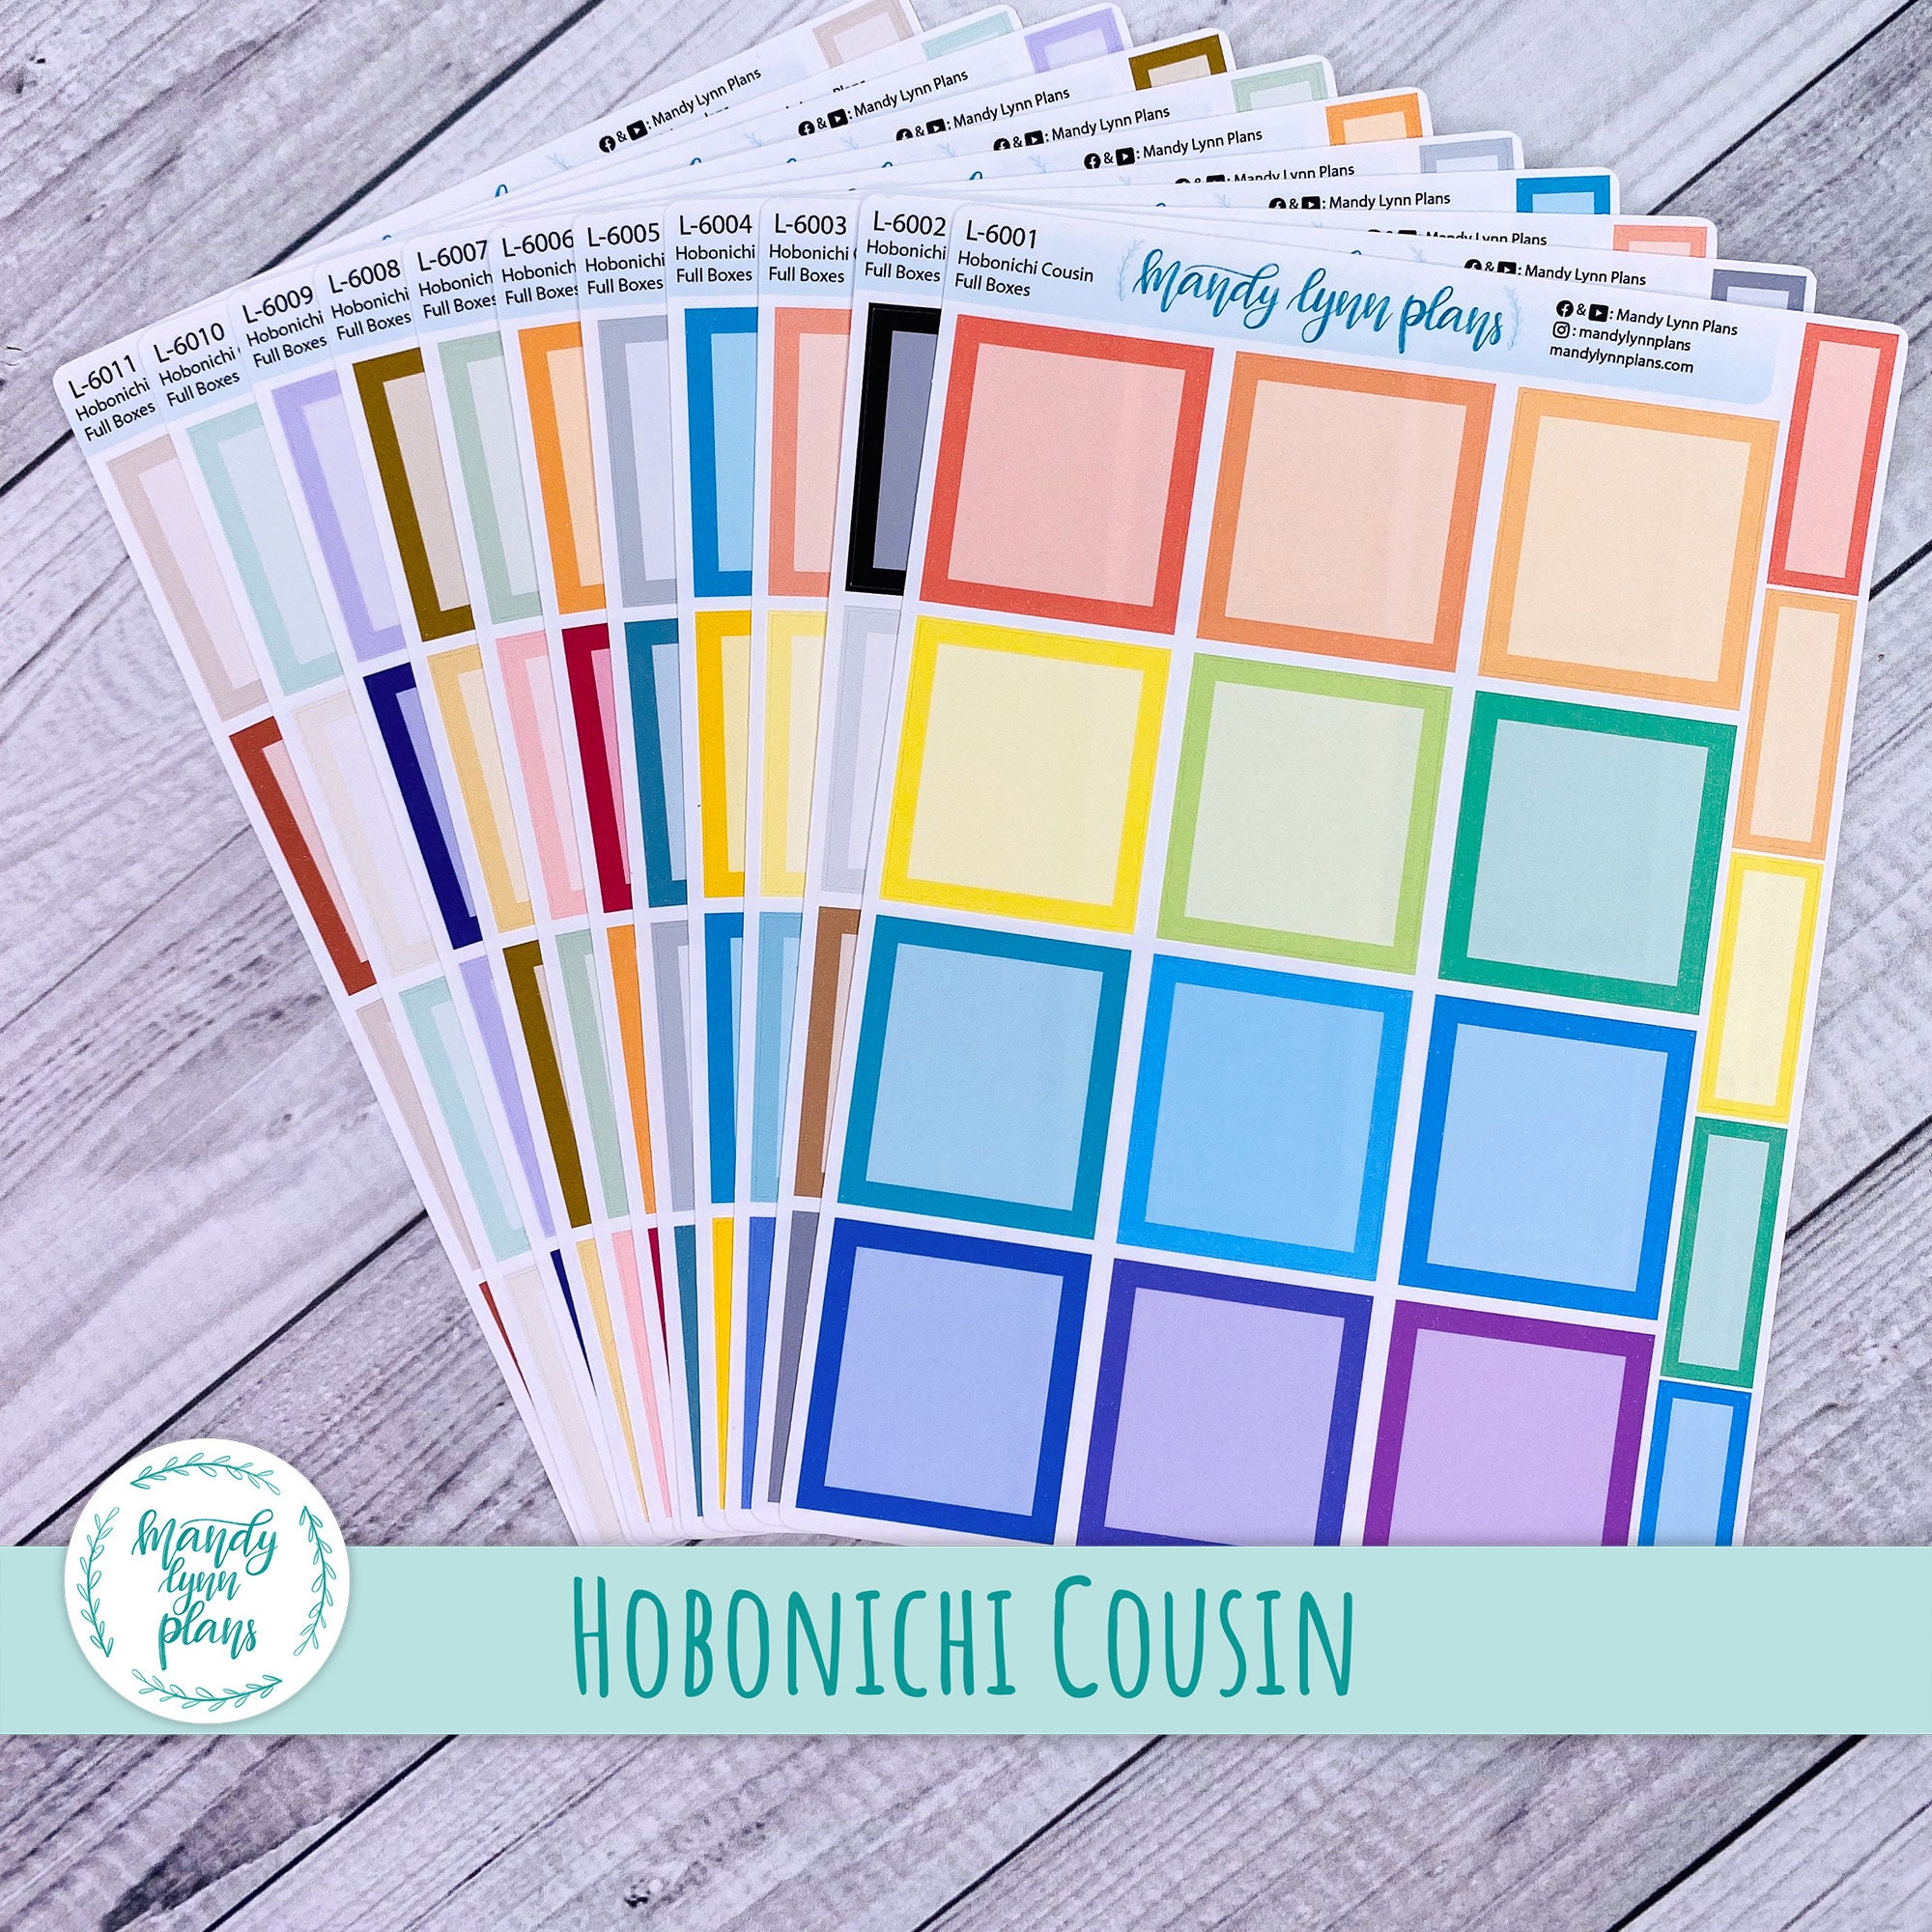 Big sticky notes for the Cousin? : r/hobonichi